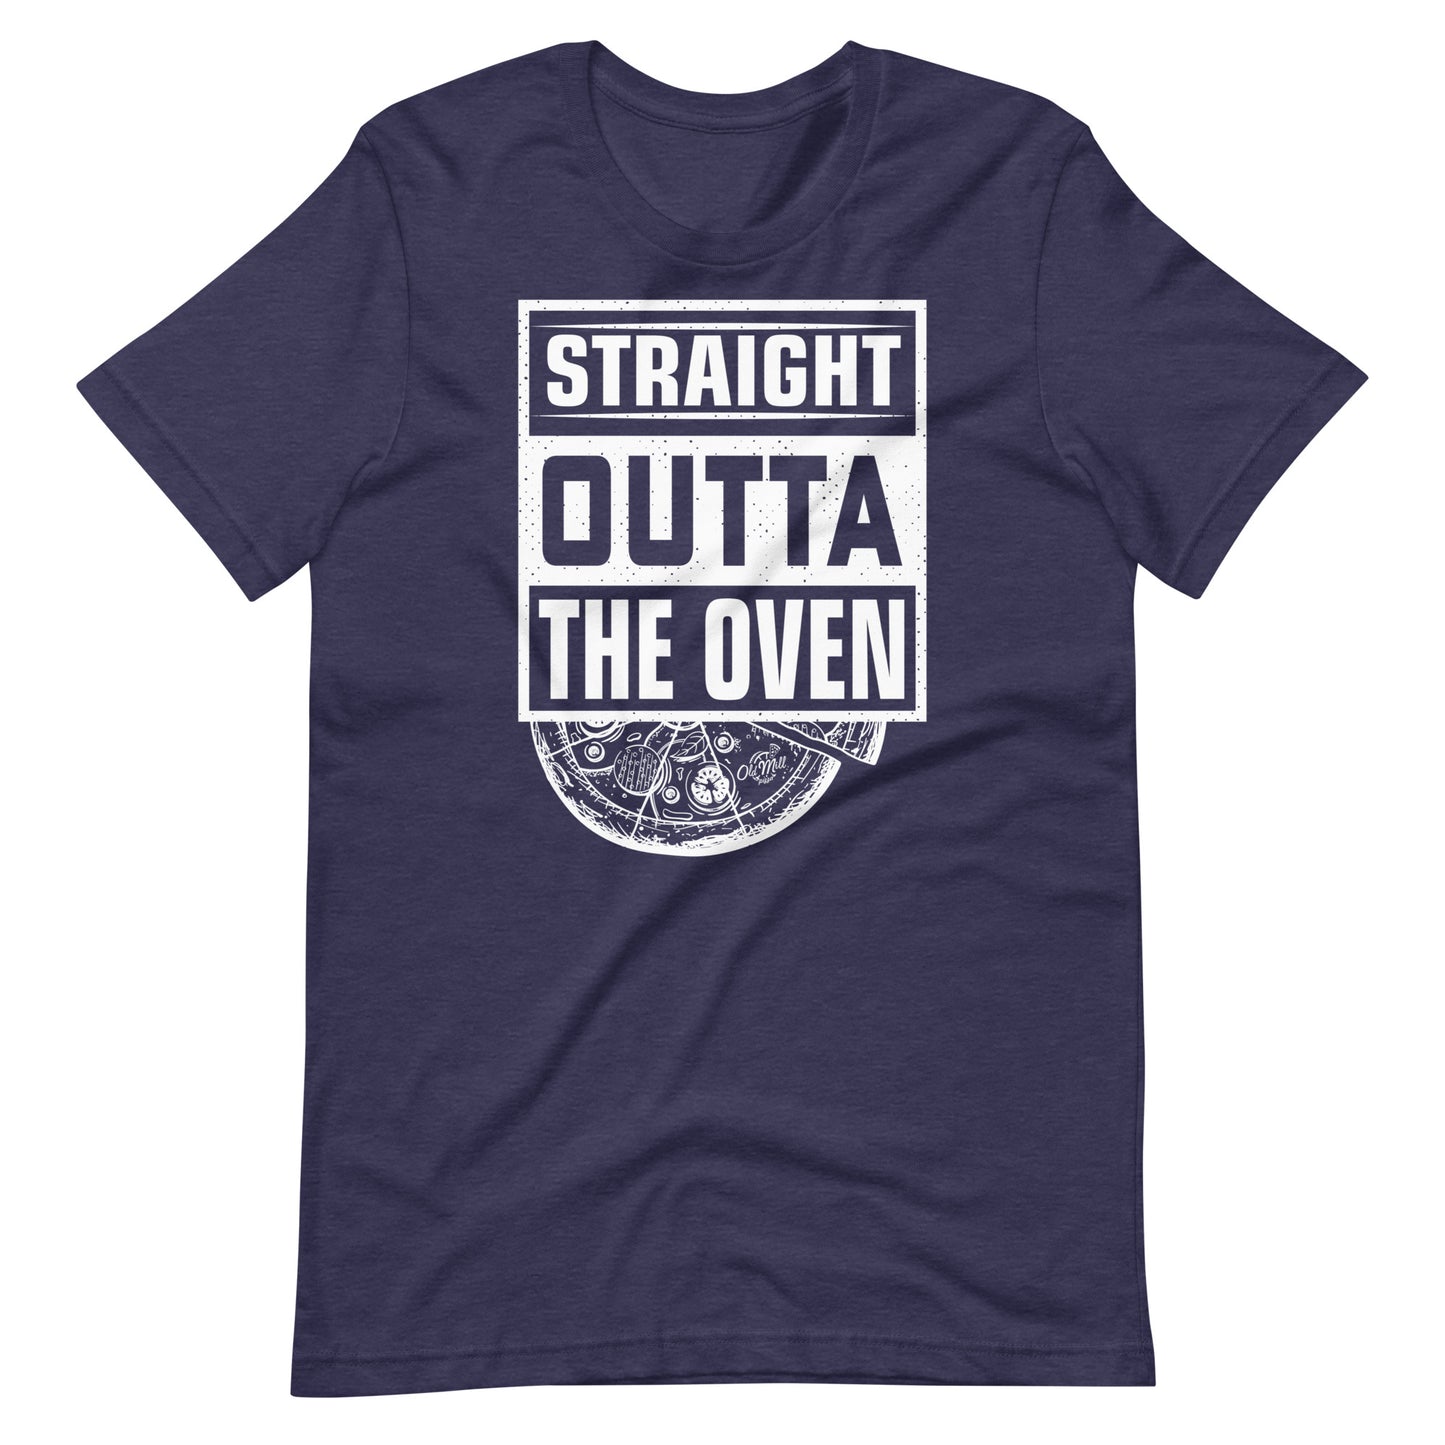 Old Mill Pizza – Straight Outta The Oven Shirt